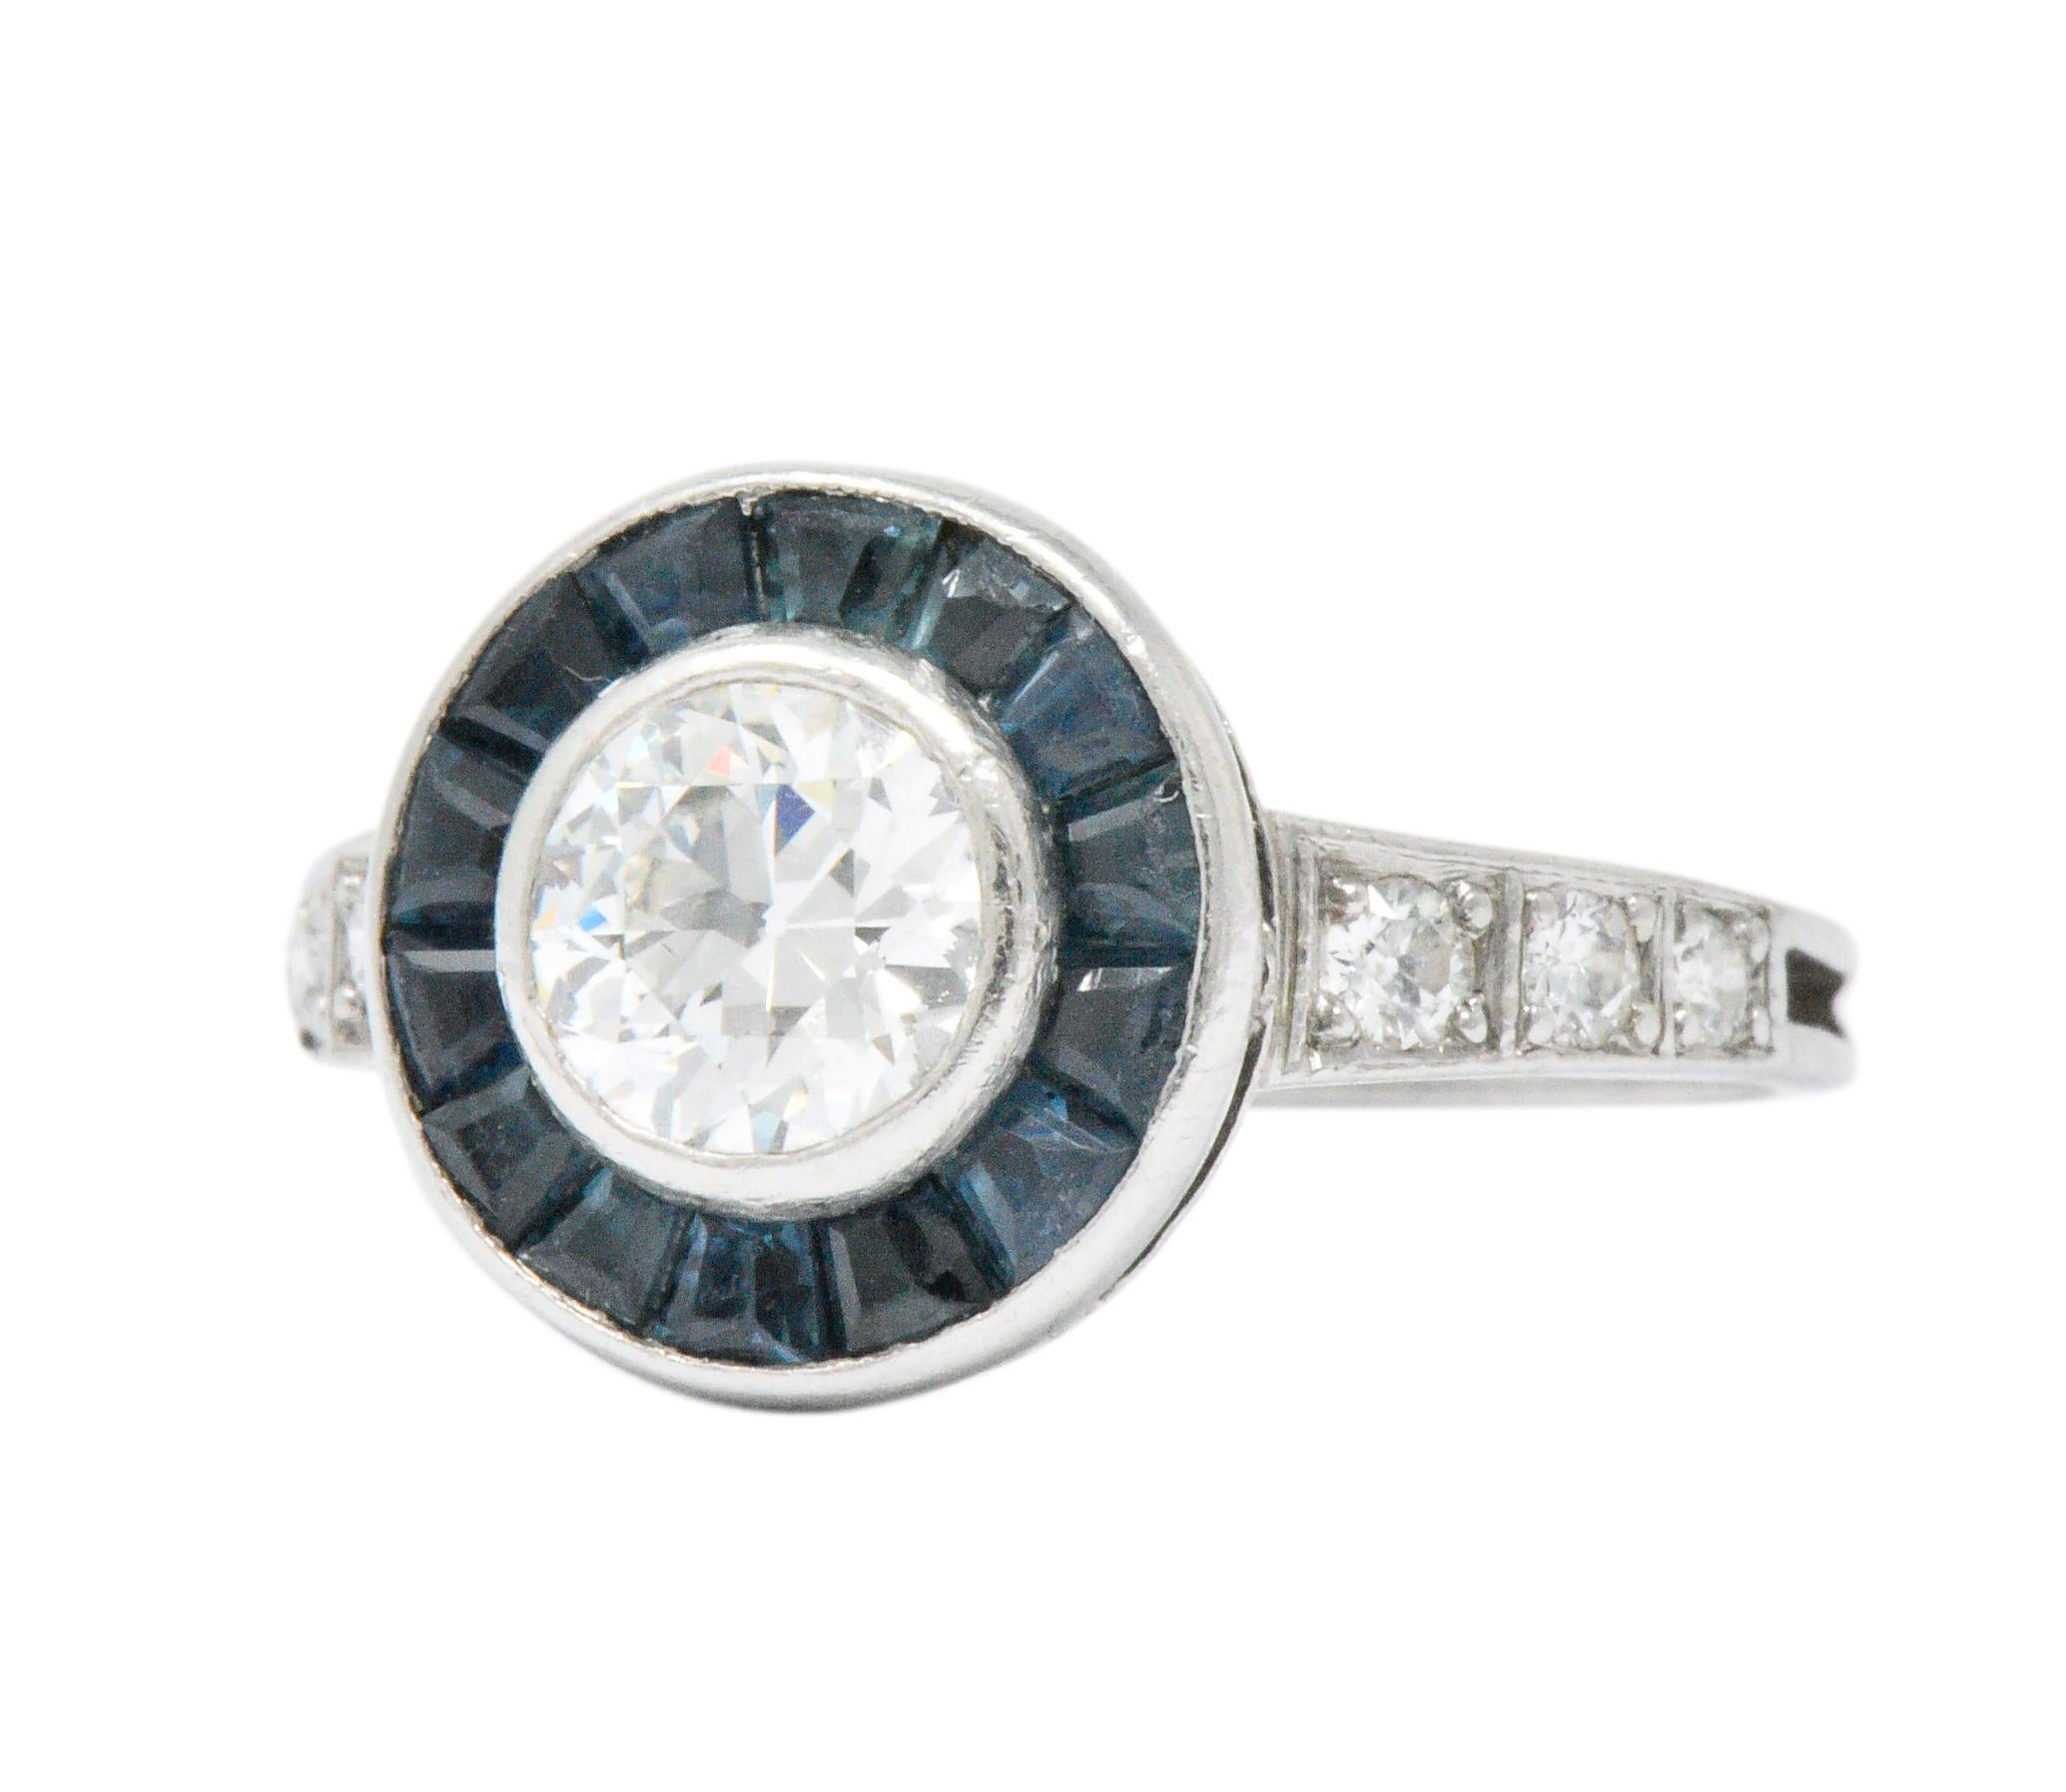 Centering an old European cut diamond weighing approximately 0.55 carats, G color and VS clarity

With a calibré cut sapphire surround, deep blue 

Old European cut diamonds accenting the shank and weighing approximately 0.12 carats total, eye-clean